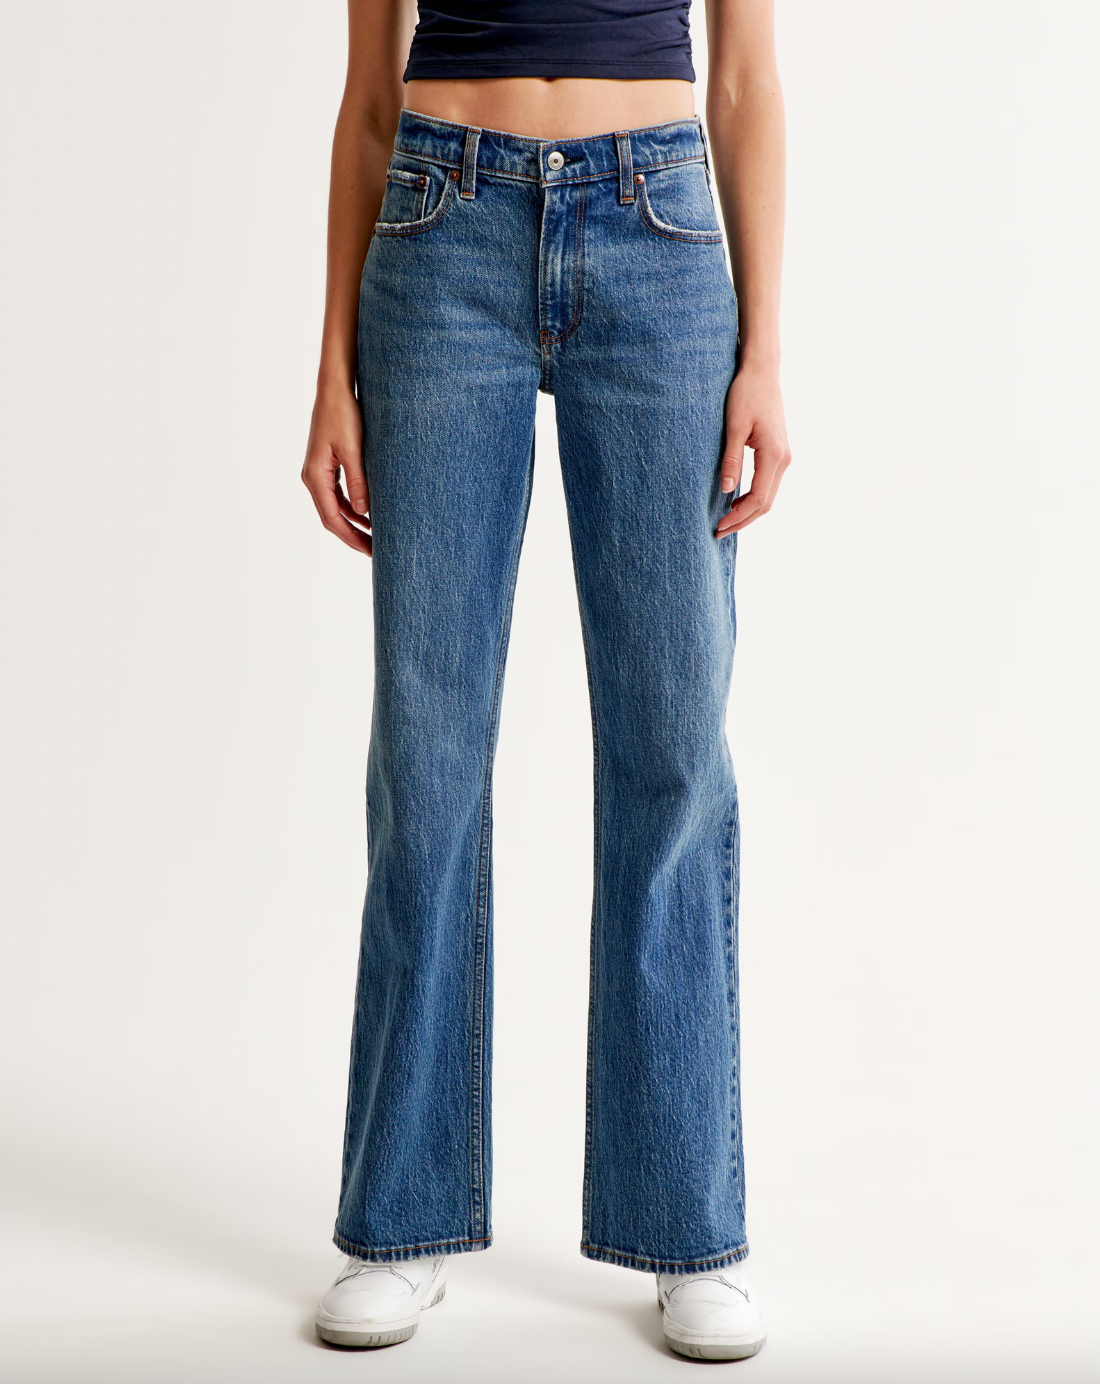 Abercrombie & Fitch + Low Rise Baggy Jean